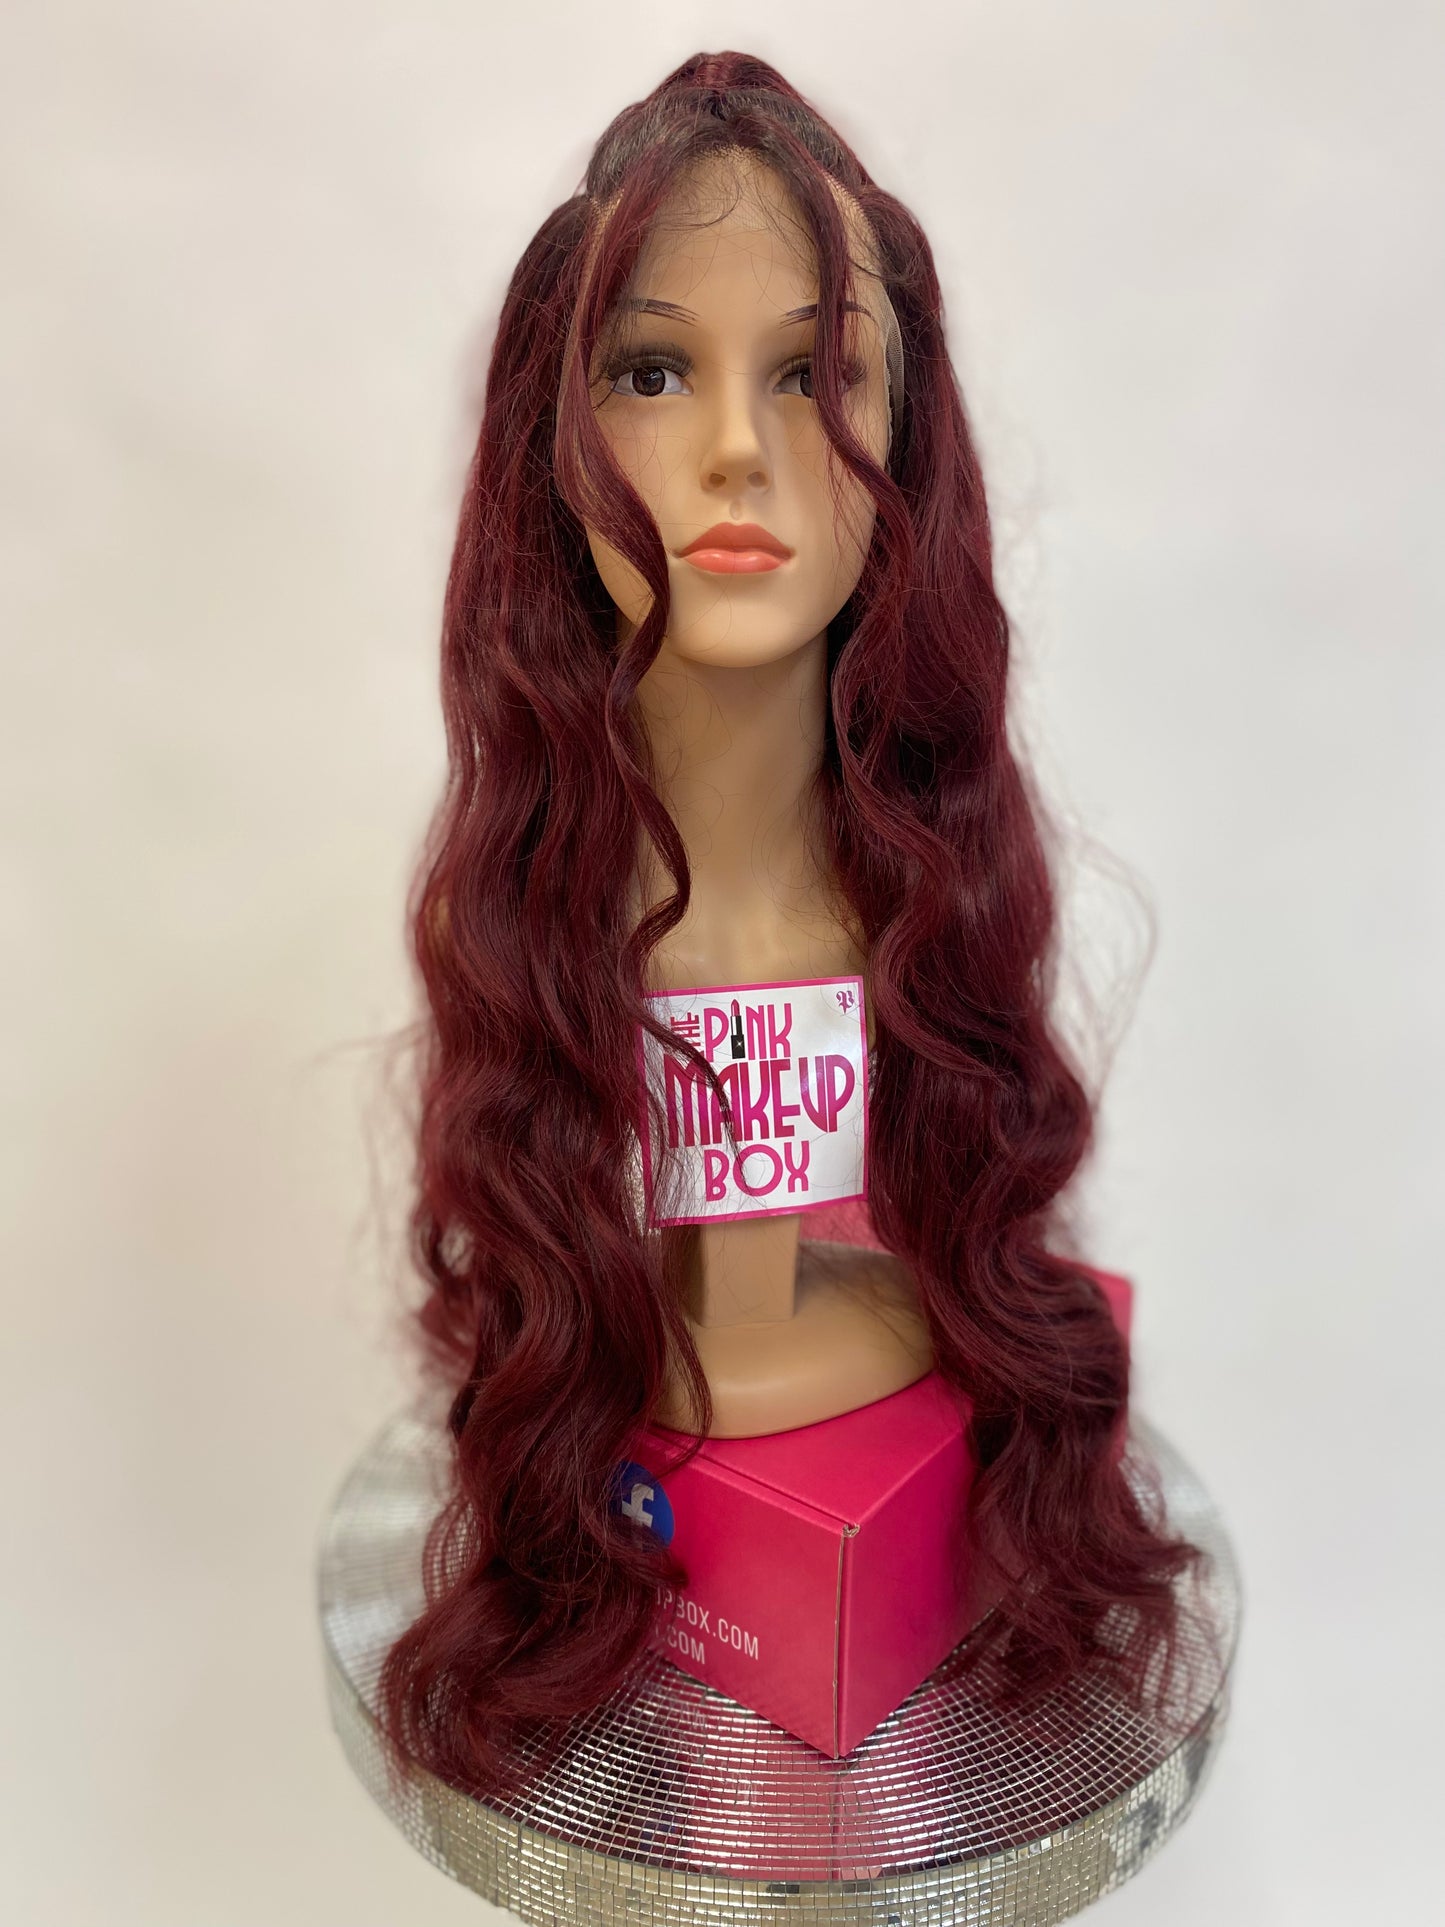 375 Ariana - 13x2 & 360 Top Pony Lace Front Wig - BLK/CHERY - DaizyKat Cosmetics 375 Ariana - 13x2 & 360 Top Pony Lace Front Wig - BLK/CHERY DaizyKat Cosmetics WIGS